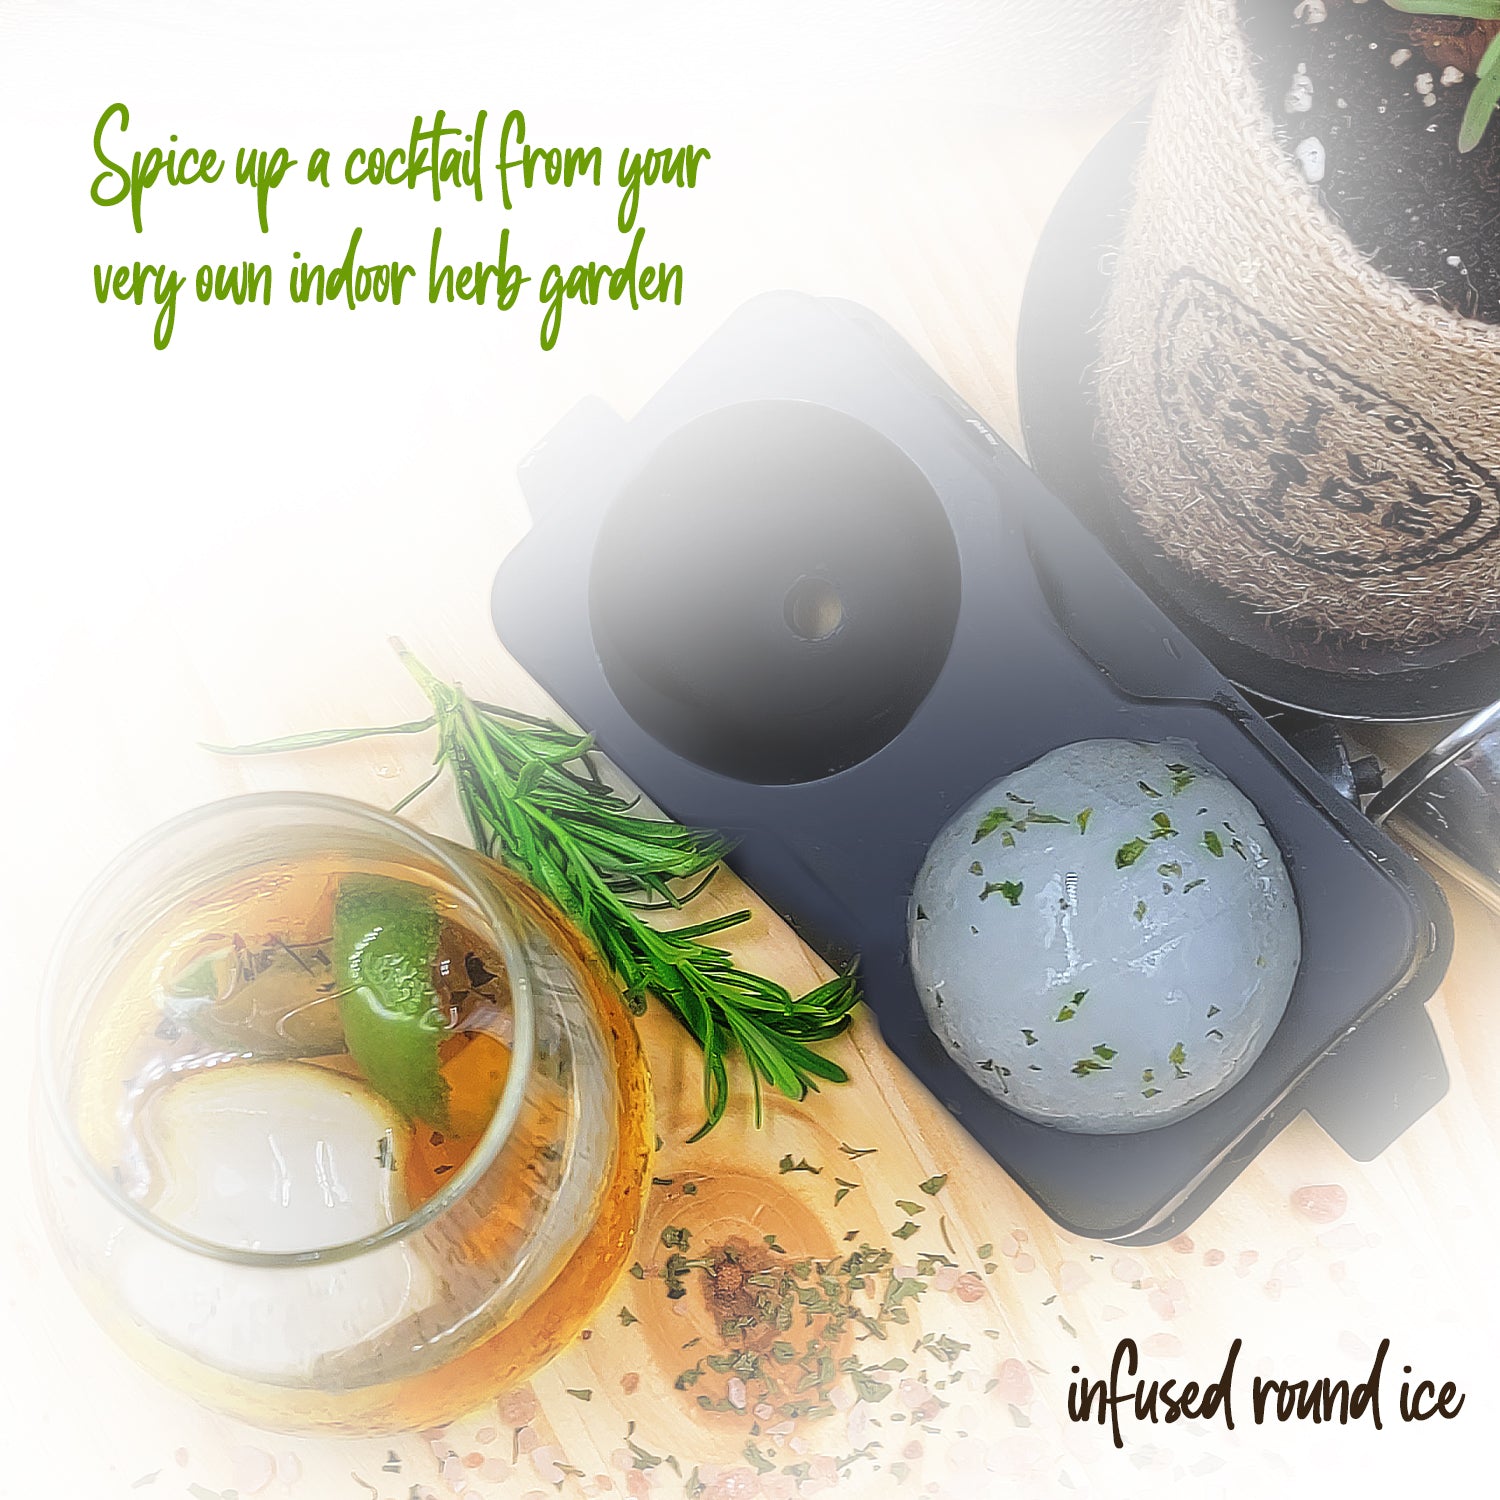 a cocktail made with fresh herbs from your new garden and ice balls made with the ice ball maker and infused with fresh herbs